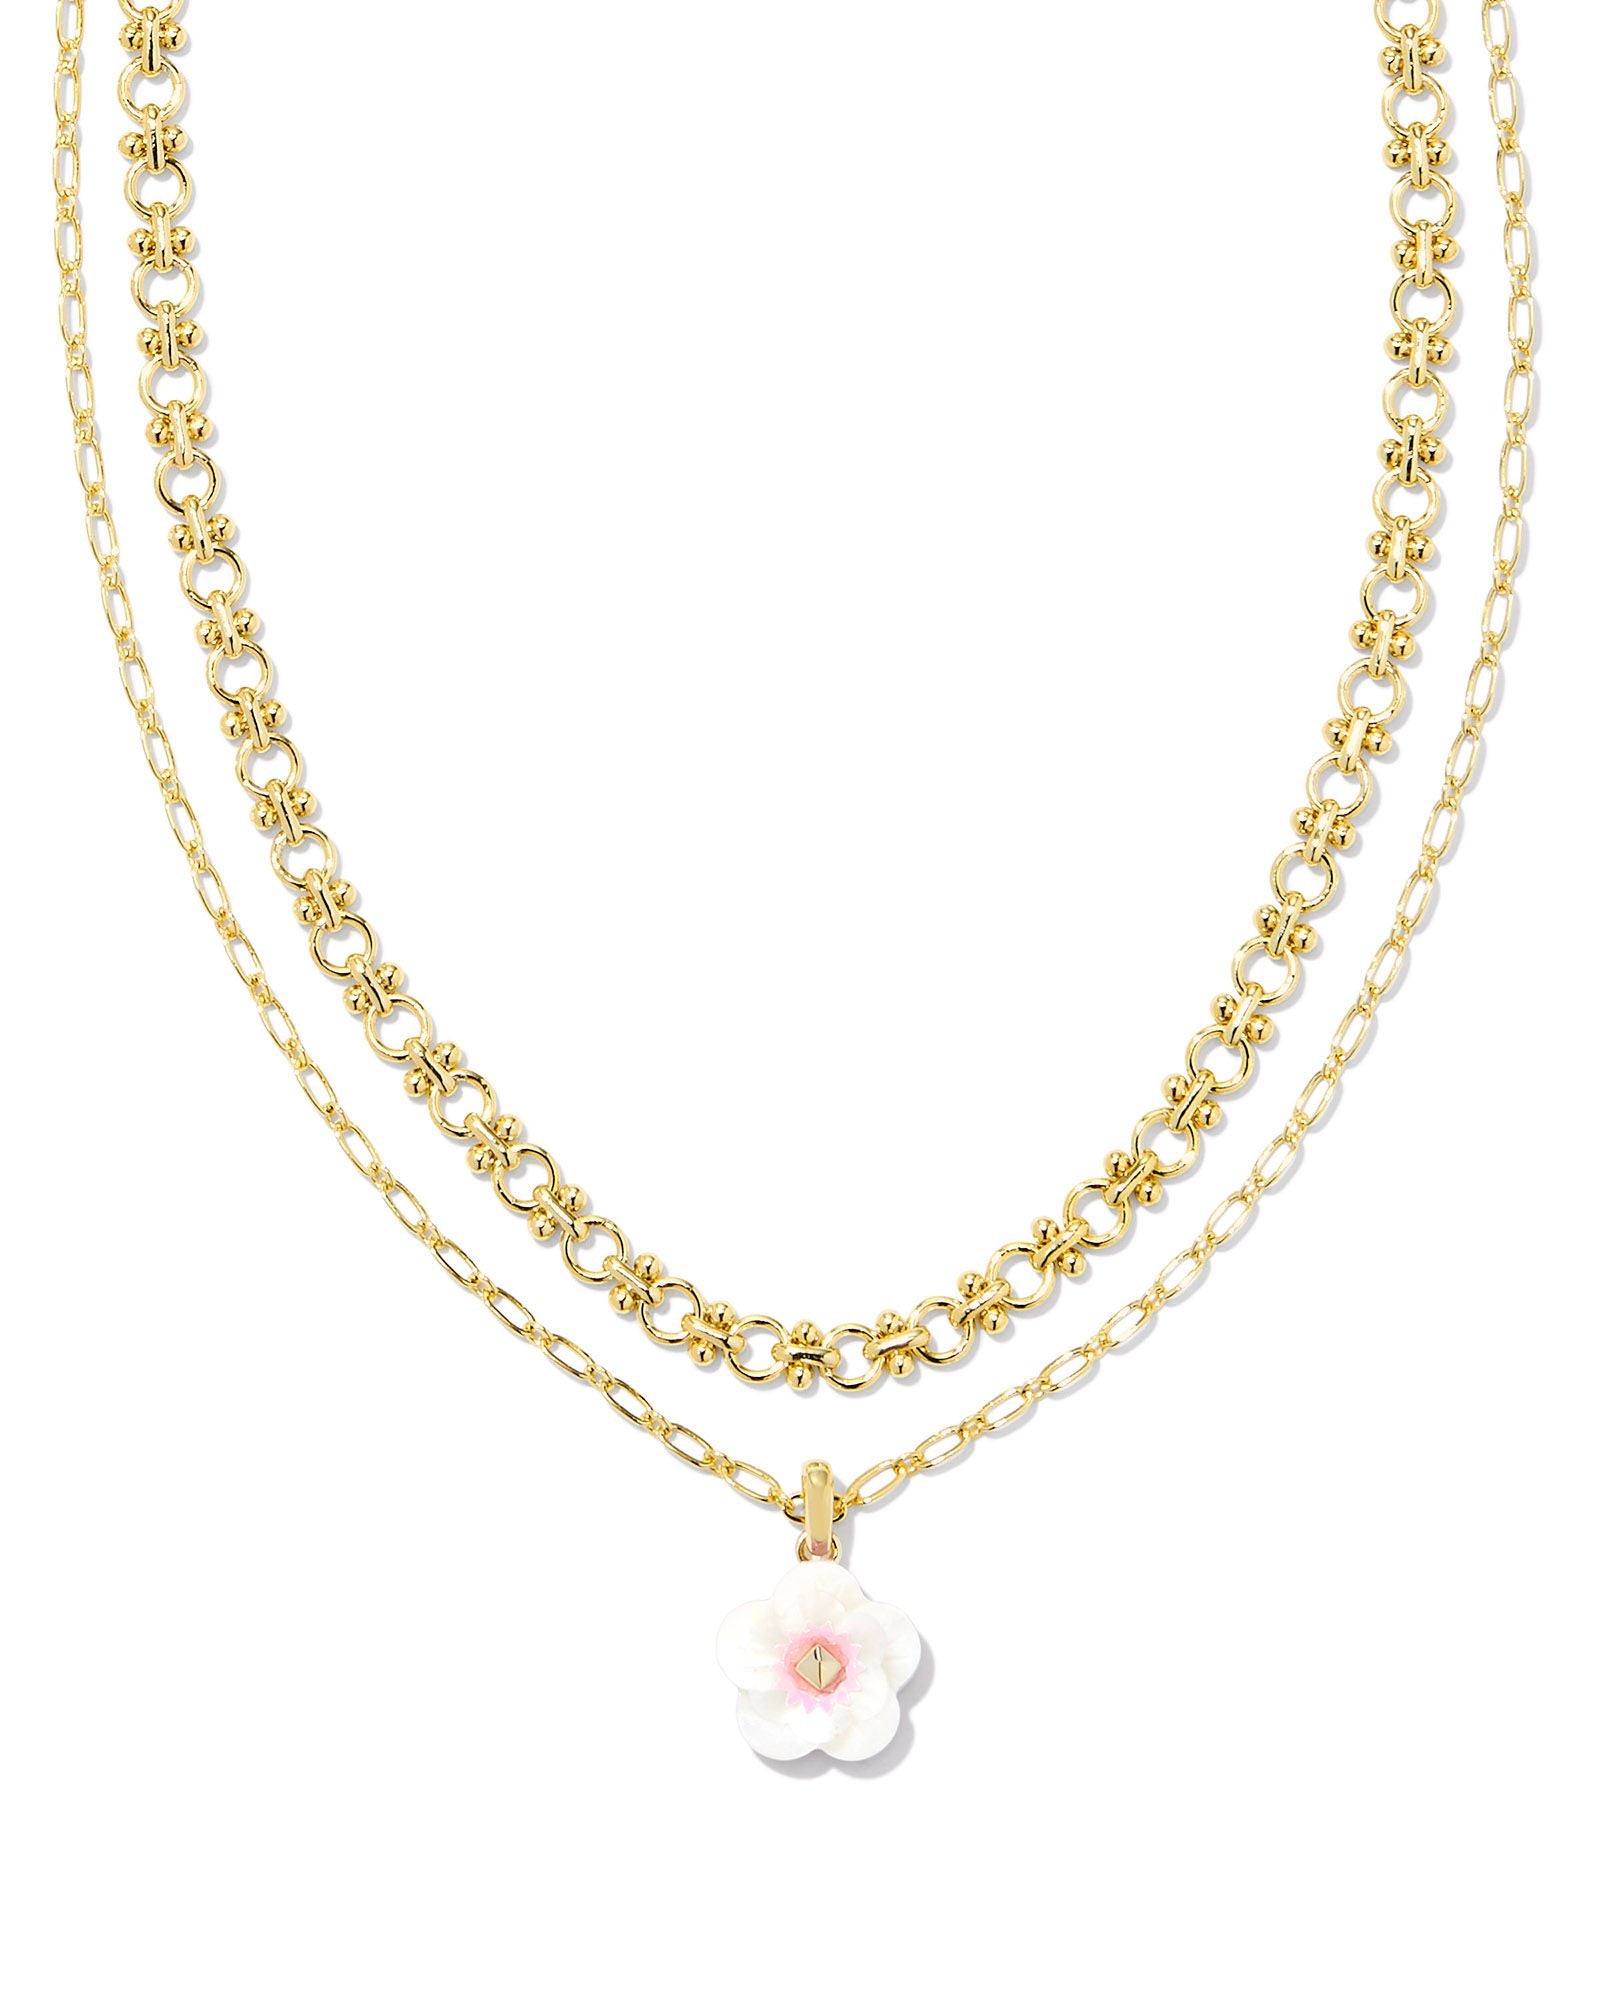 Sale Deliah Gold Multi Strand Necklace Iridescent Pink White Mix